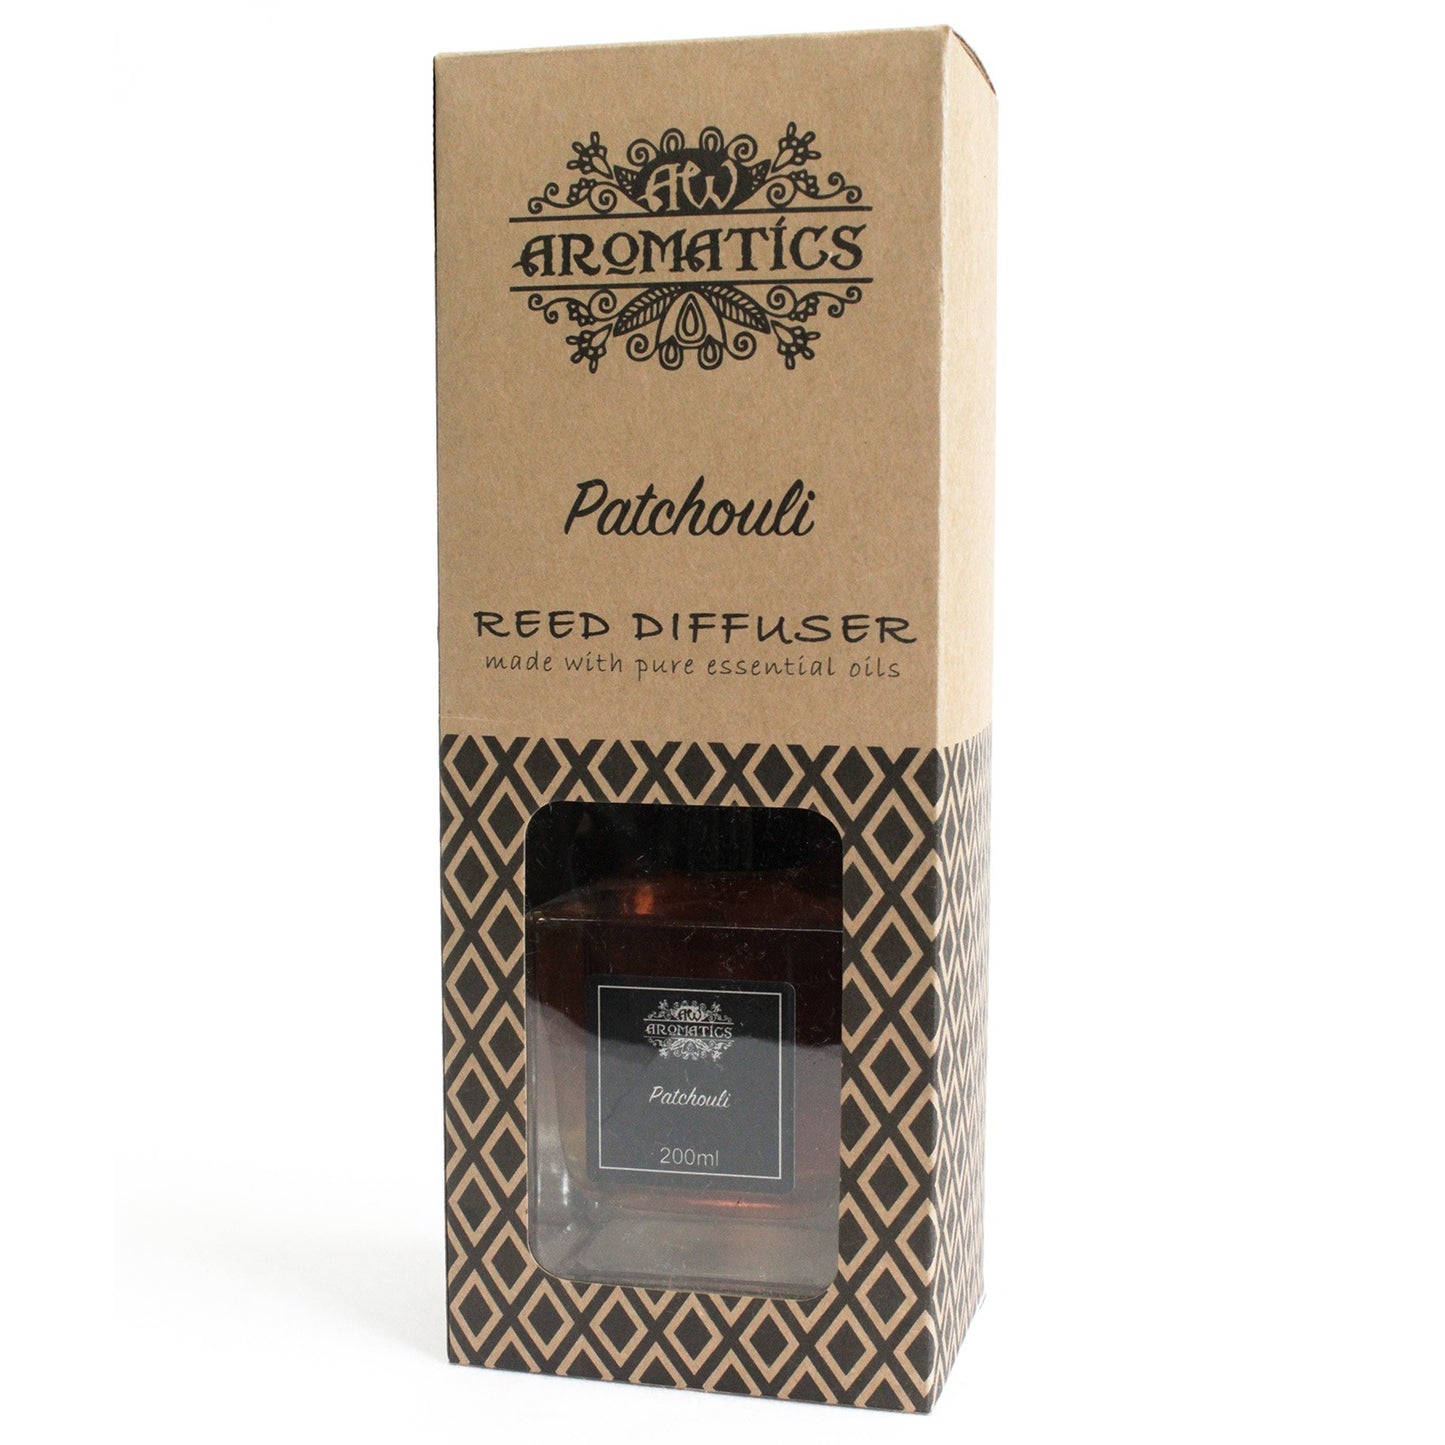 Patchouli Essential Oil Reed Diffuser - 200ml